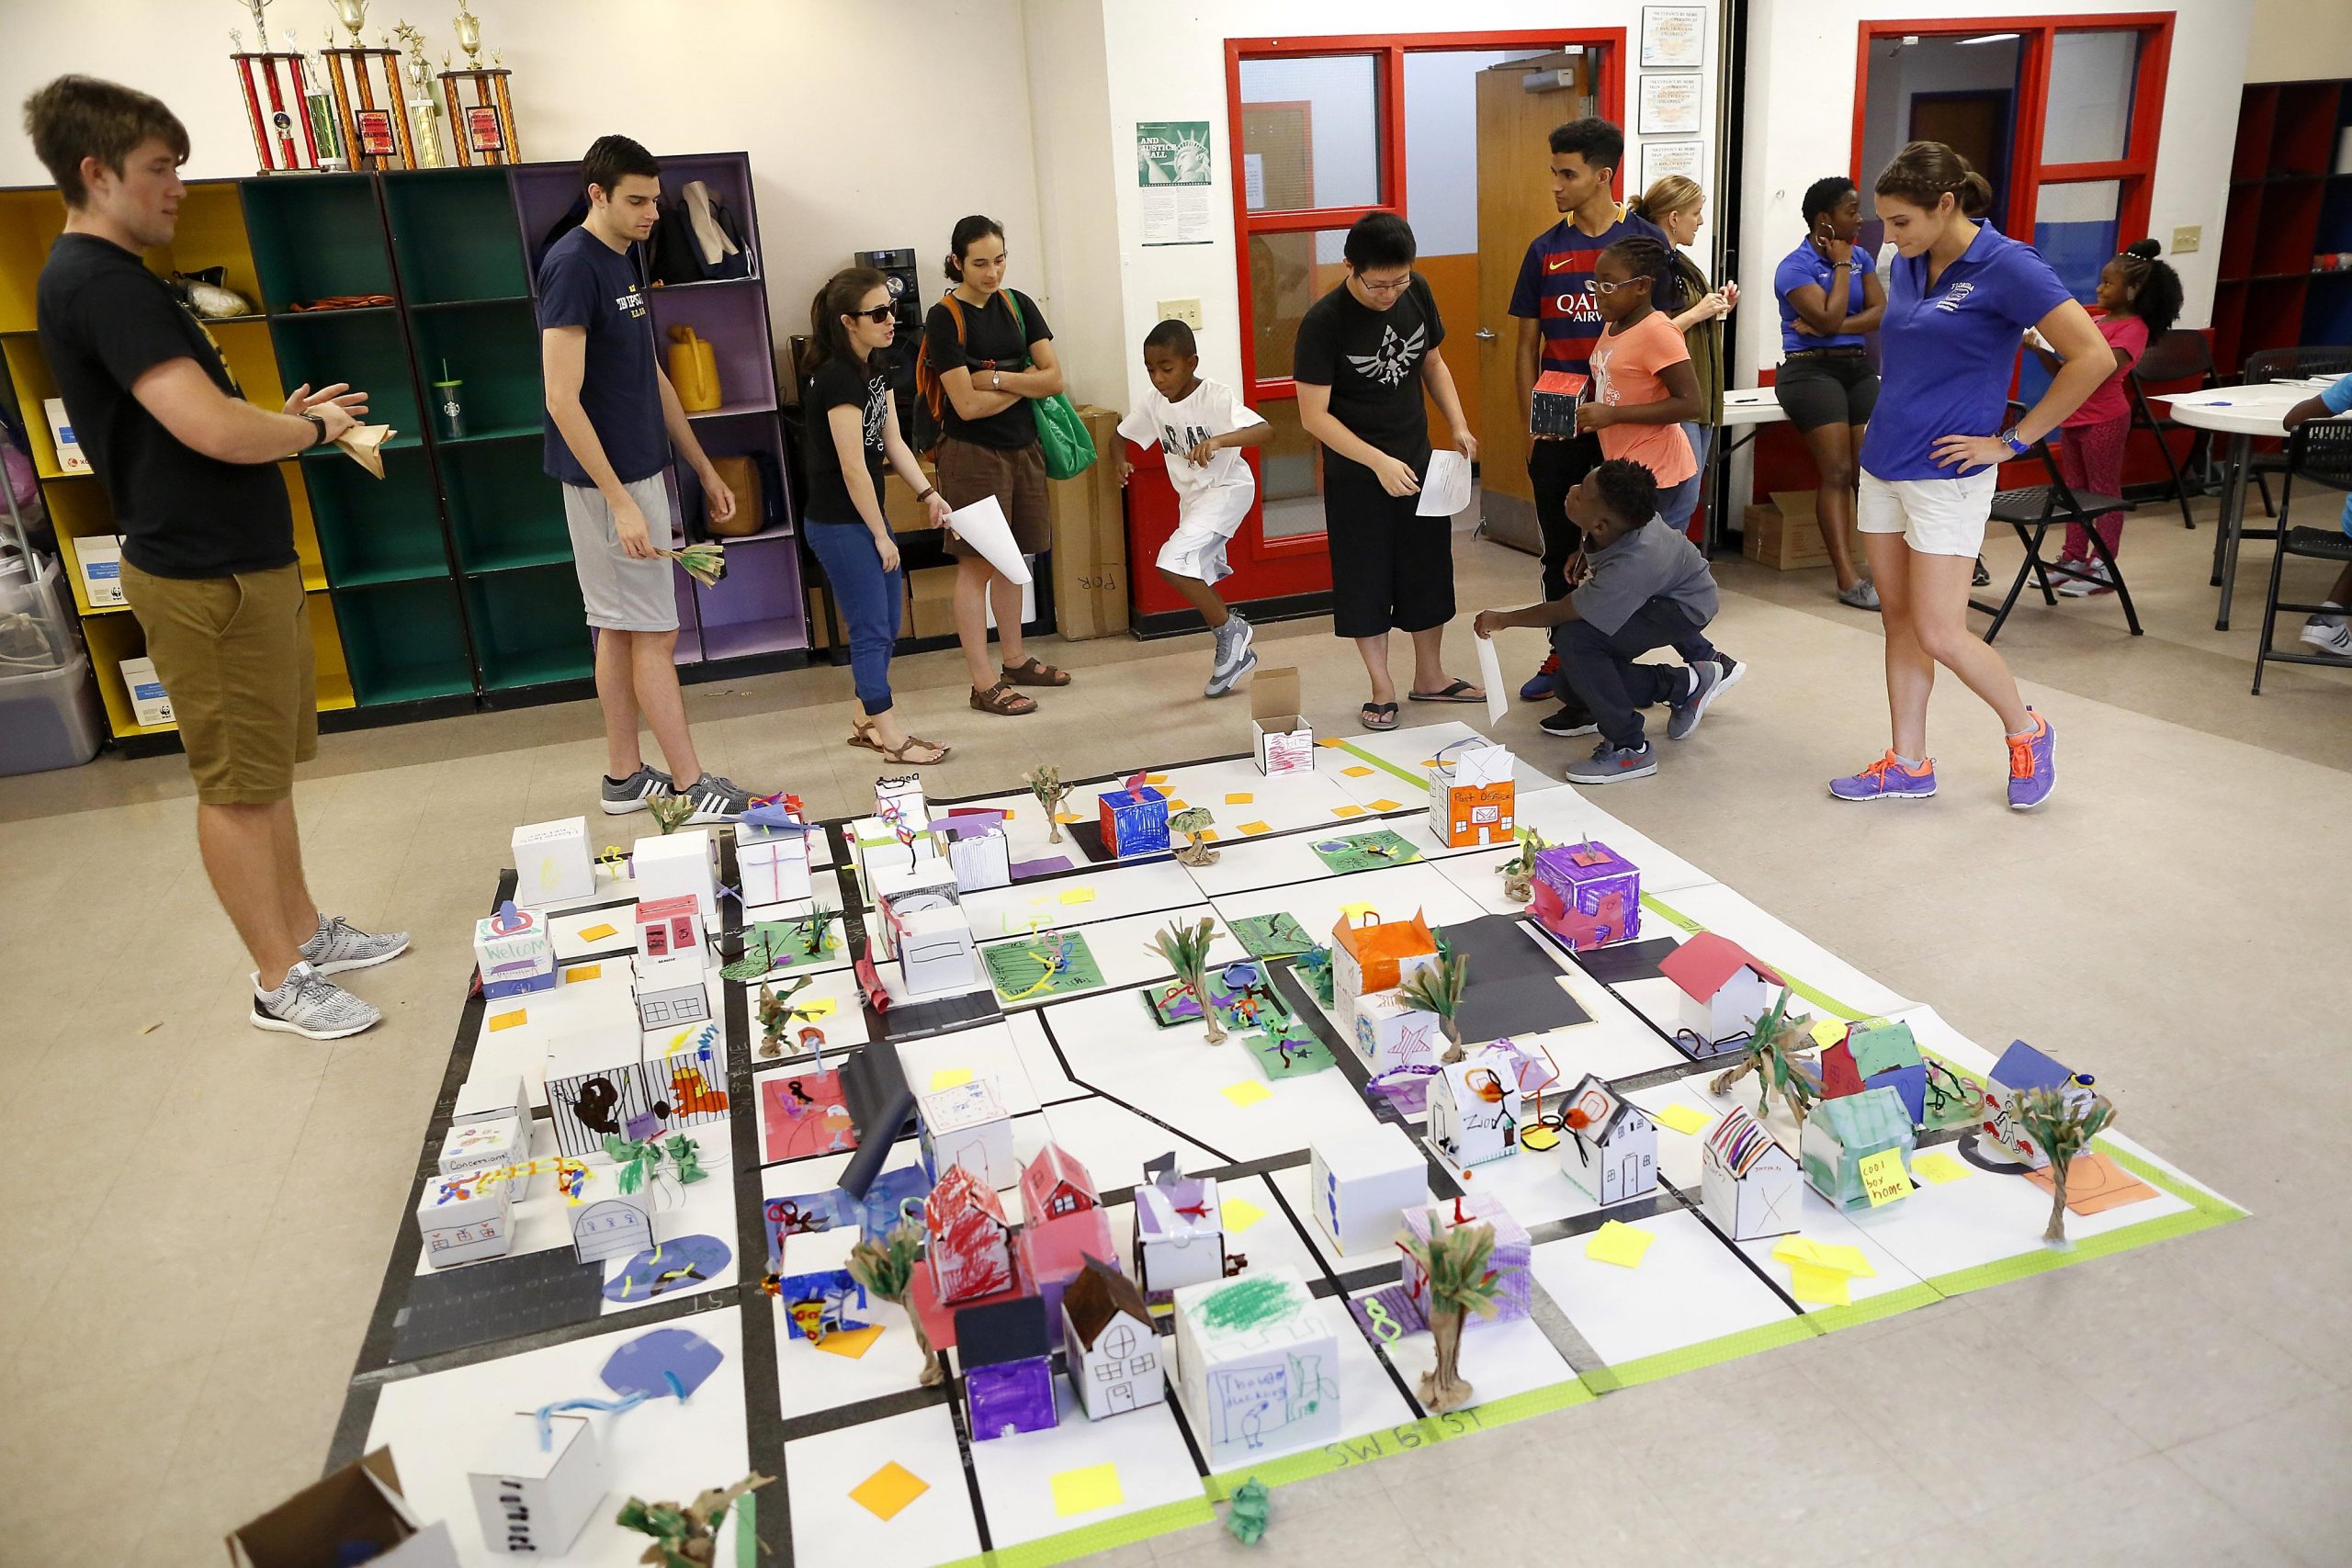 A group of excited students and instructors stand behind a diorama depicting a neighborhood divided by black lines and made of colorful boxes.